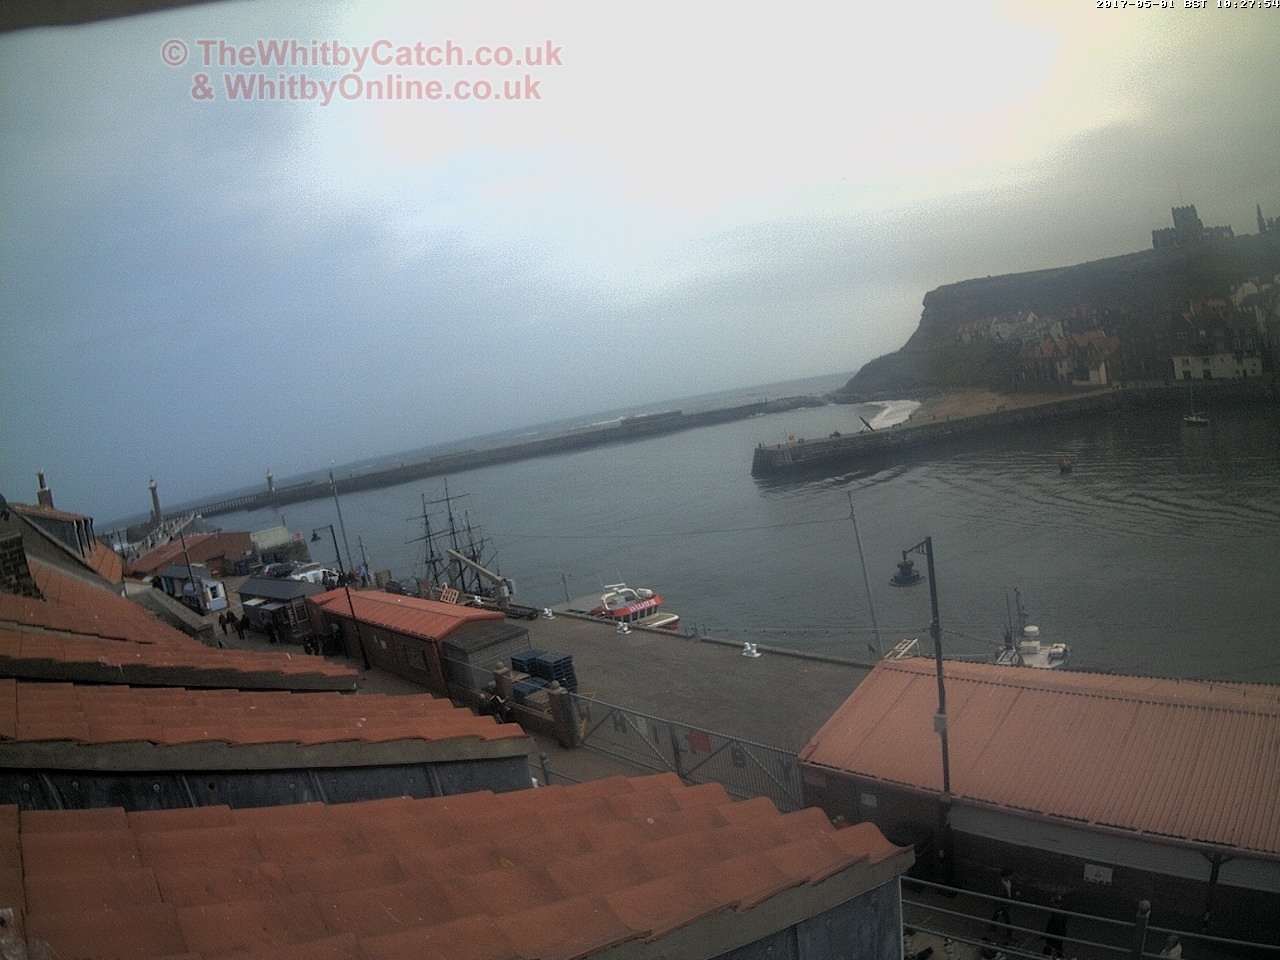 Whitby Mon 1st May 2017 10:28.